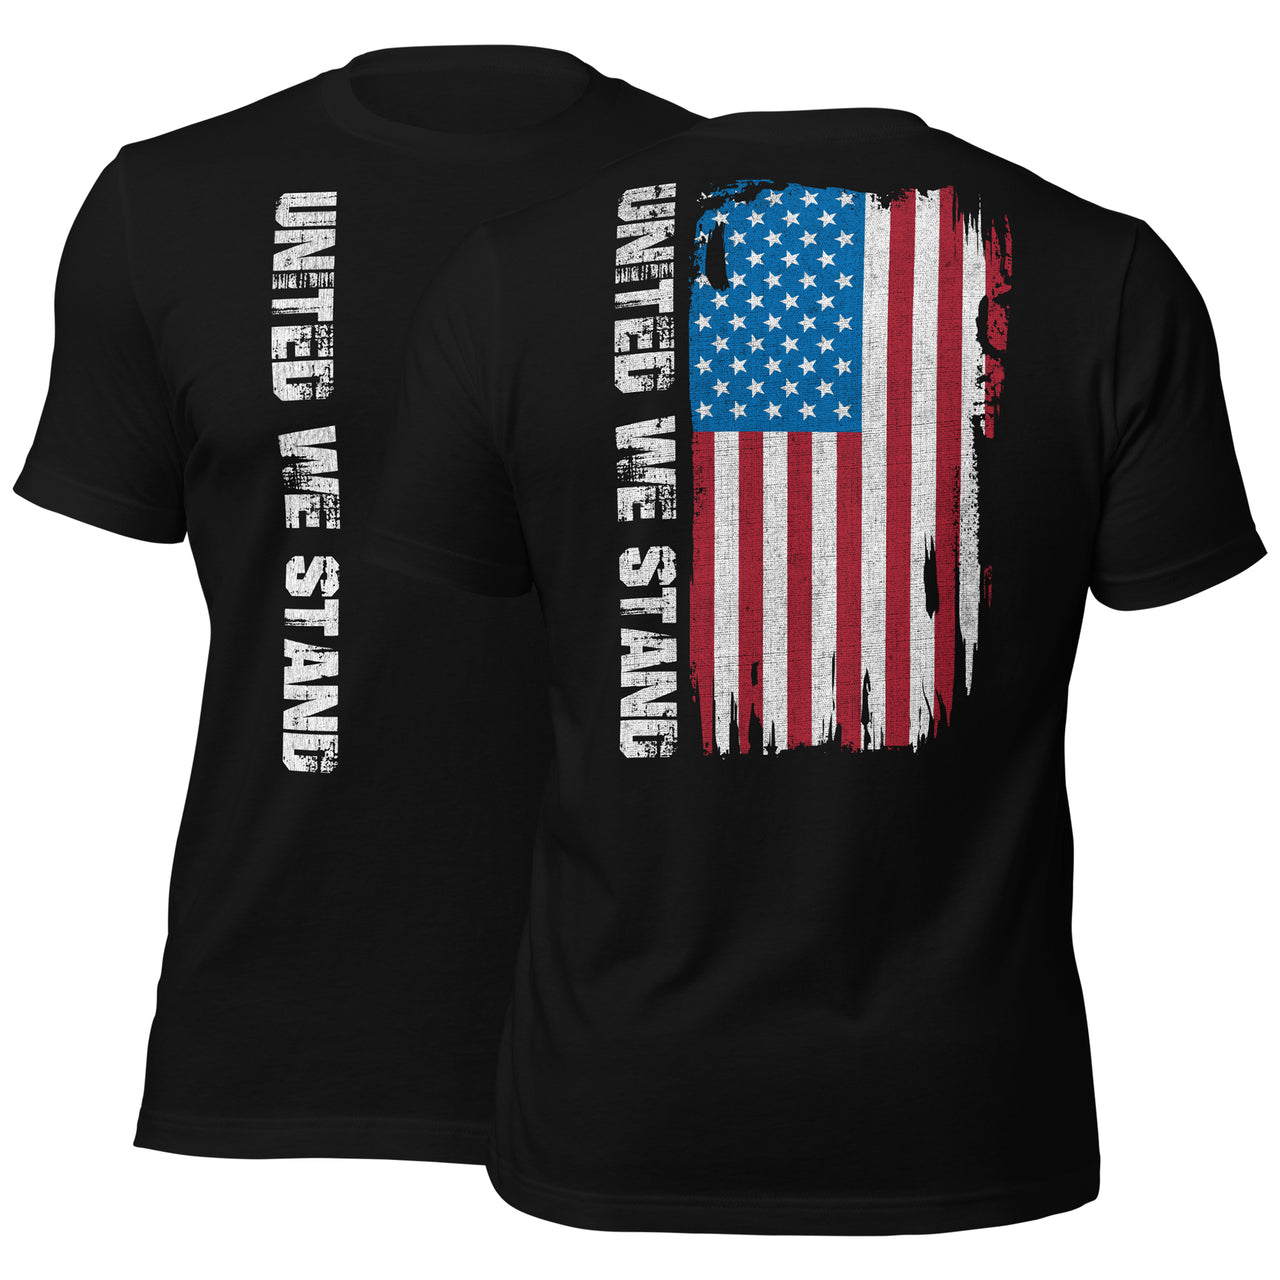 United We Stand Full Color American Flag T-Shirt in black